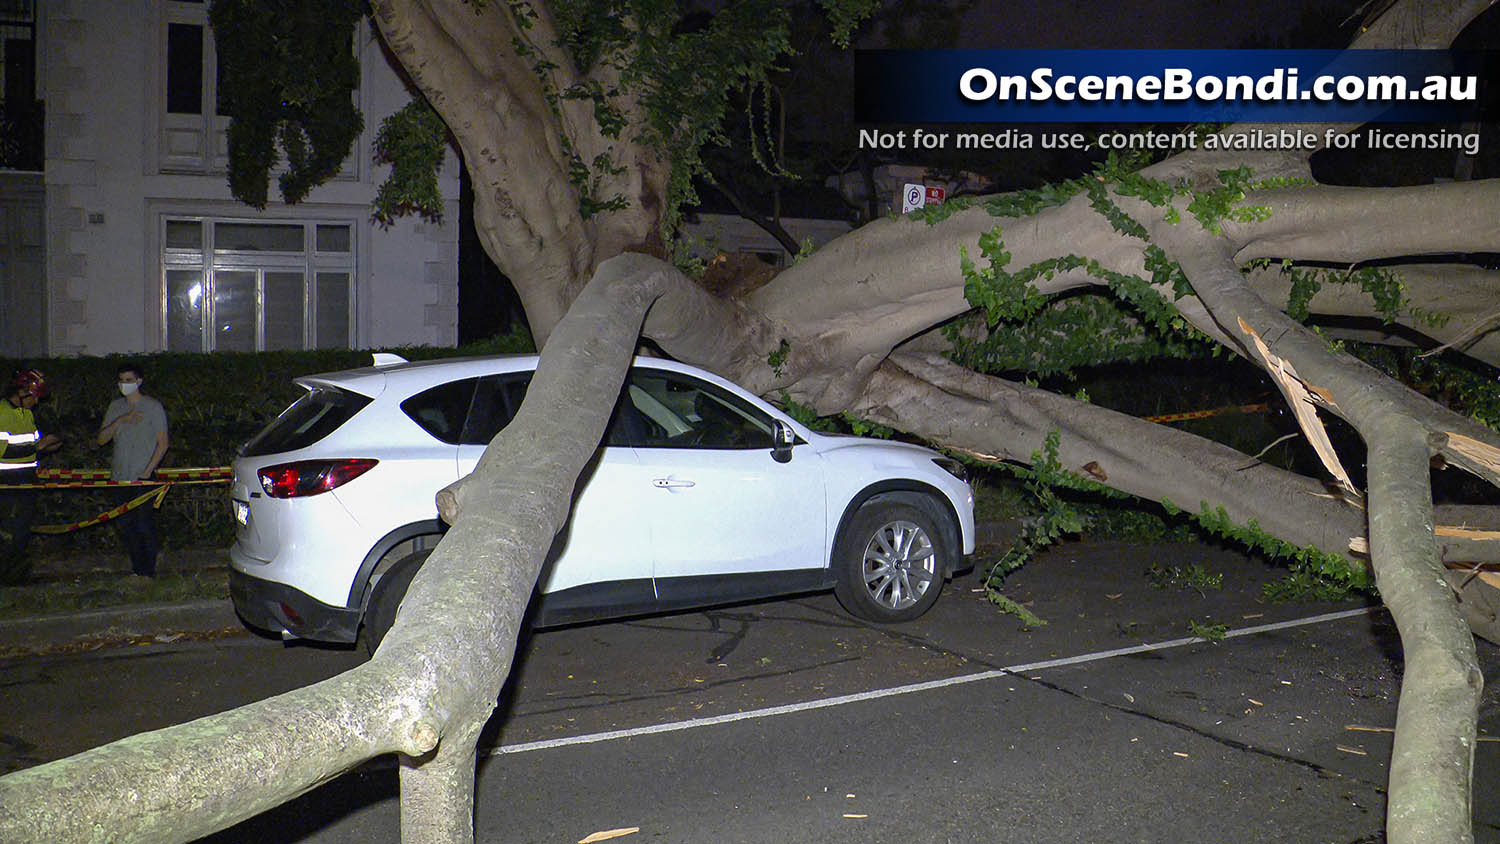 Tree crashes onto roadway cutting power to homes in Woollahra